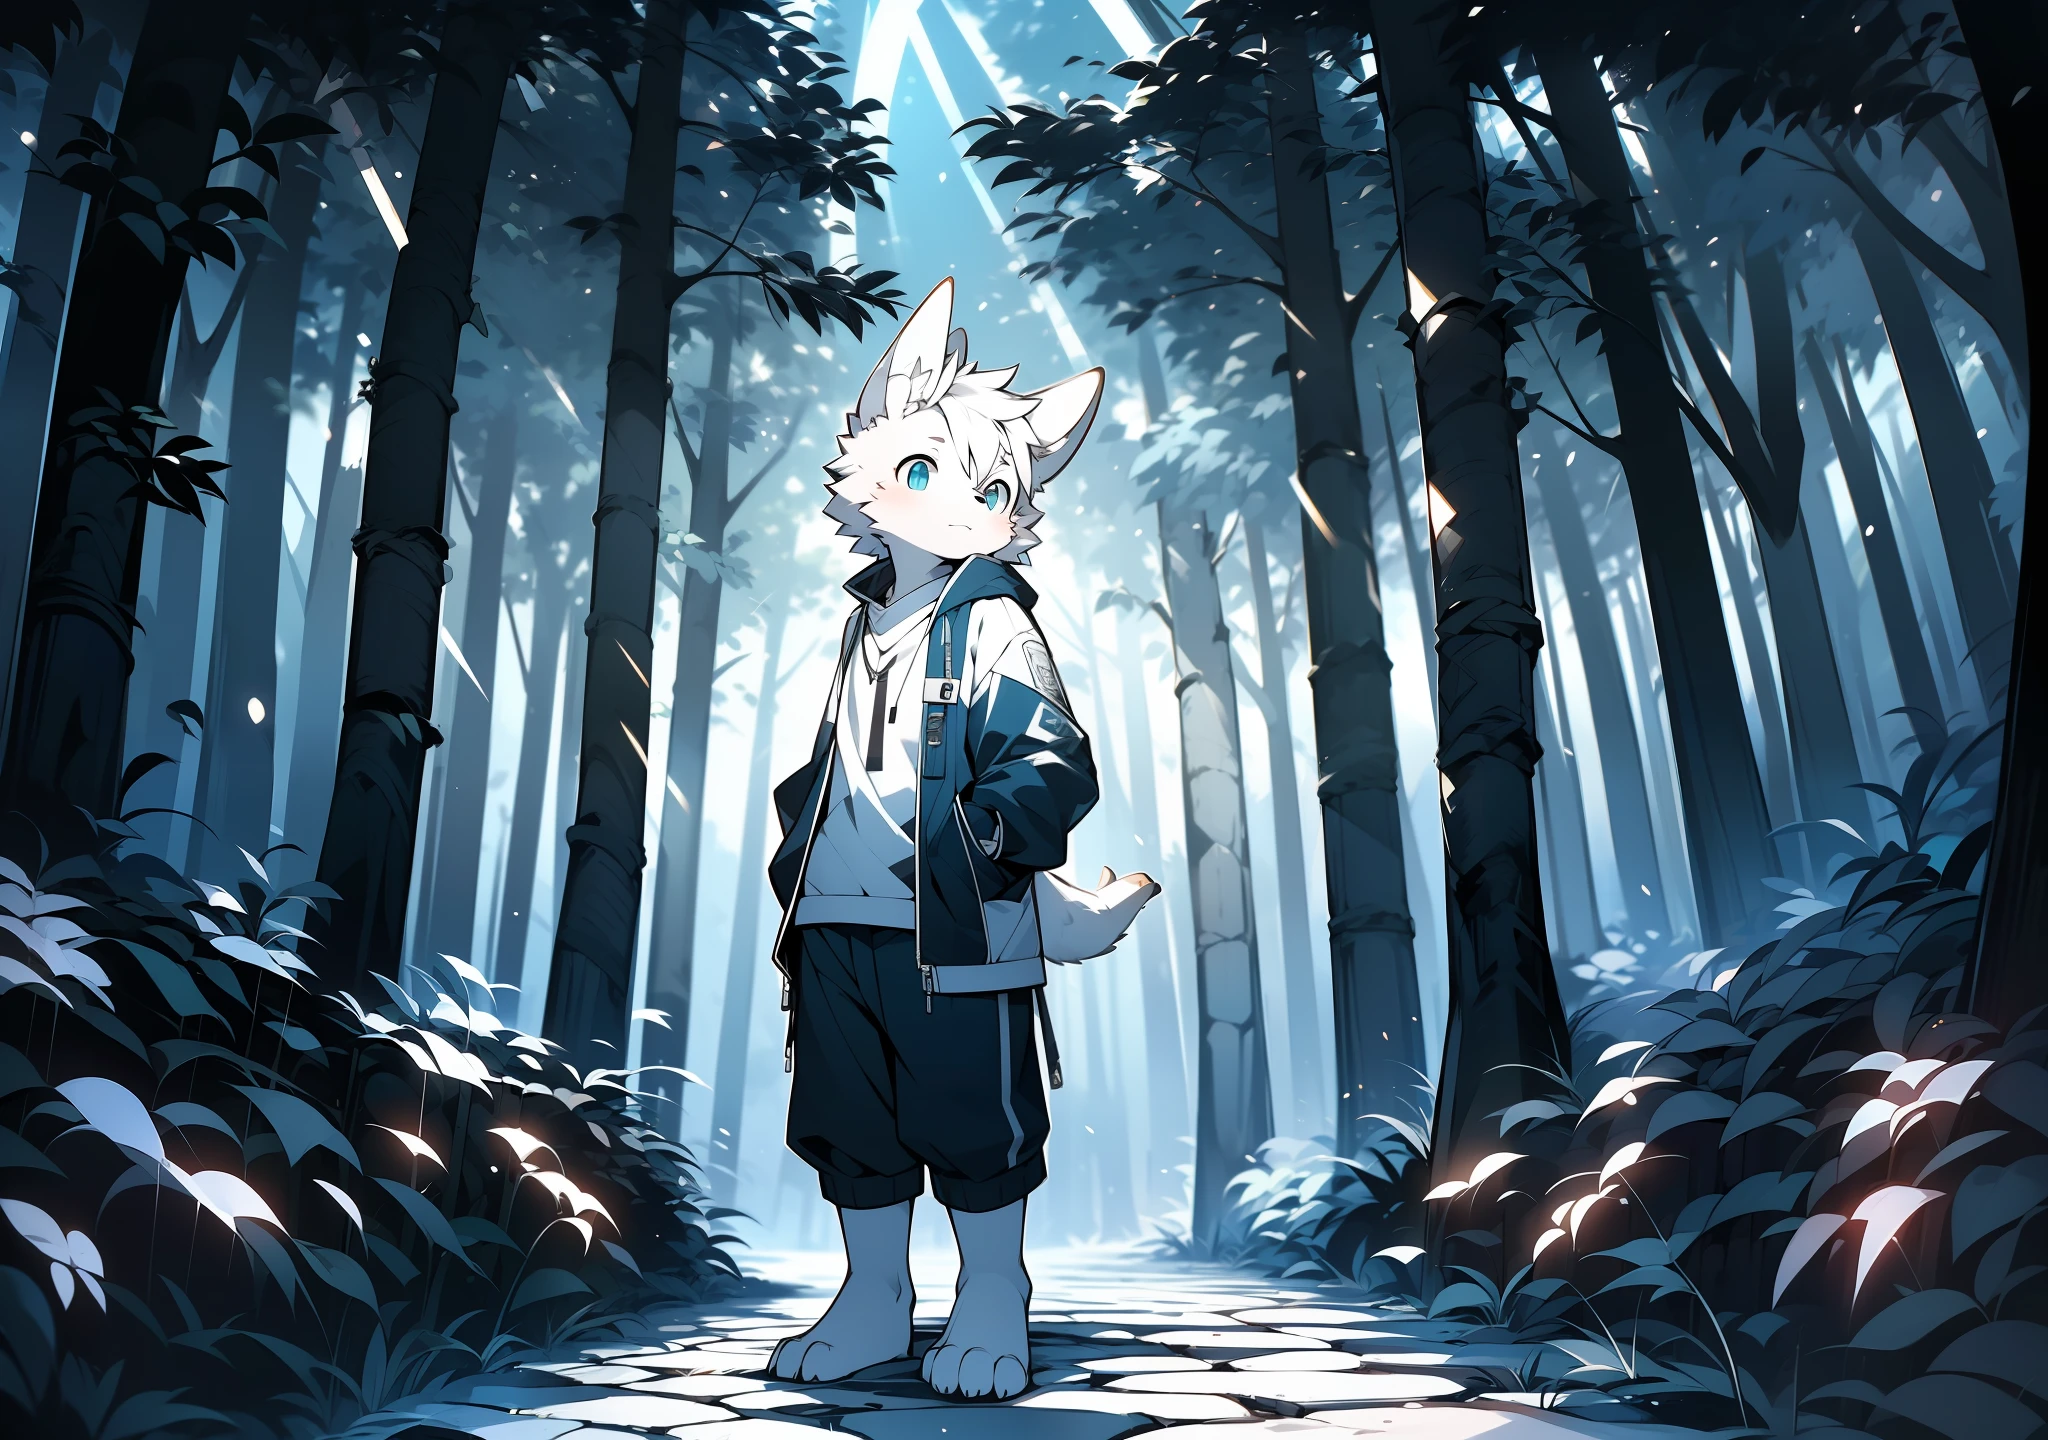 Libido boy，furry wolf，((shota)), Black and white hair, Very good figure, Handsome，adolable, Light：dark，glowworm，the night,No light ，nigth，，Reflective skin,Reddish skin，((worn-out clothing，Commoner)) ，((Deep in the forest，Stone path，Signs，solo，solo person))，exteriors，((the detail))，（depth of fields），standing on your feet